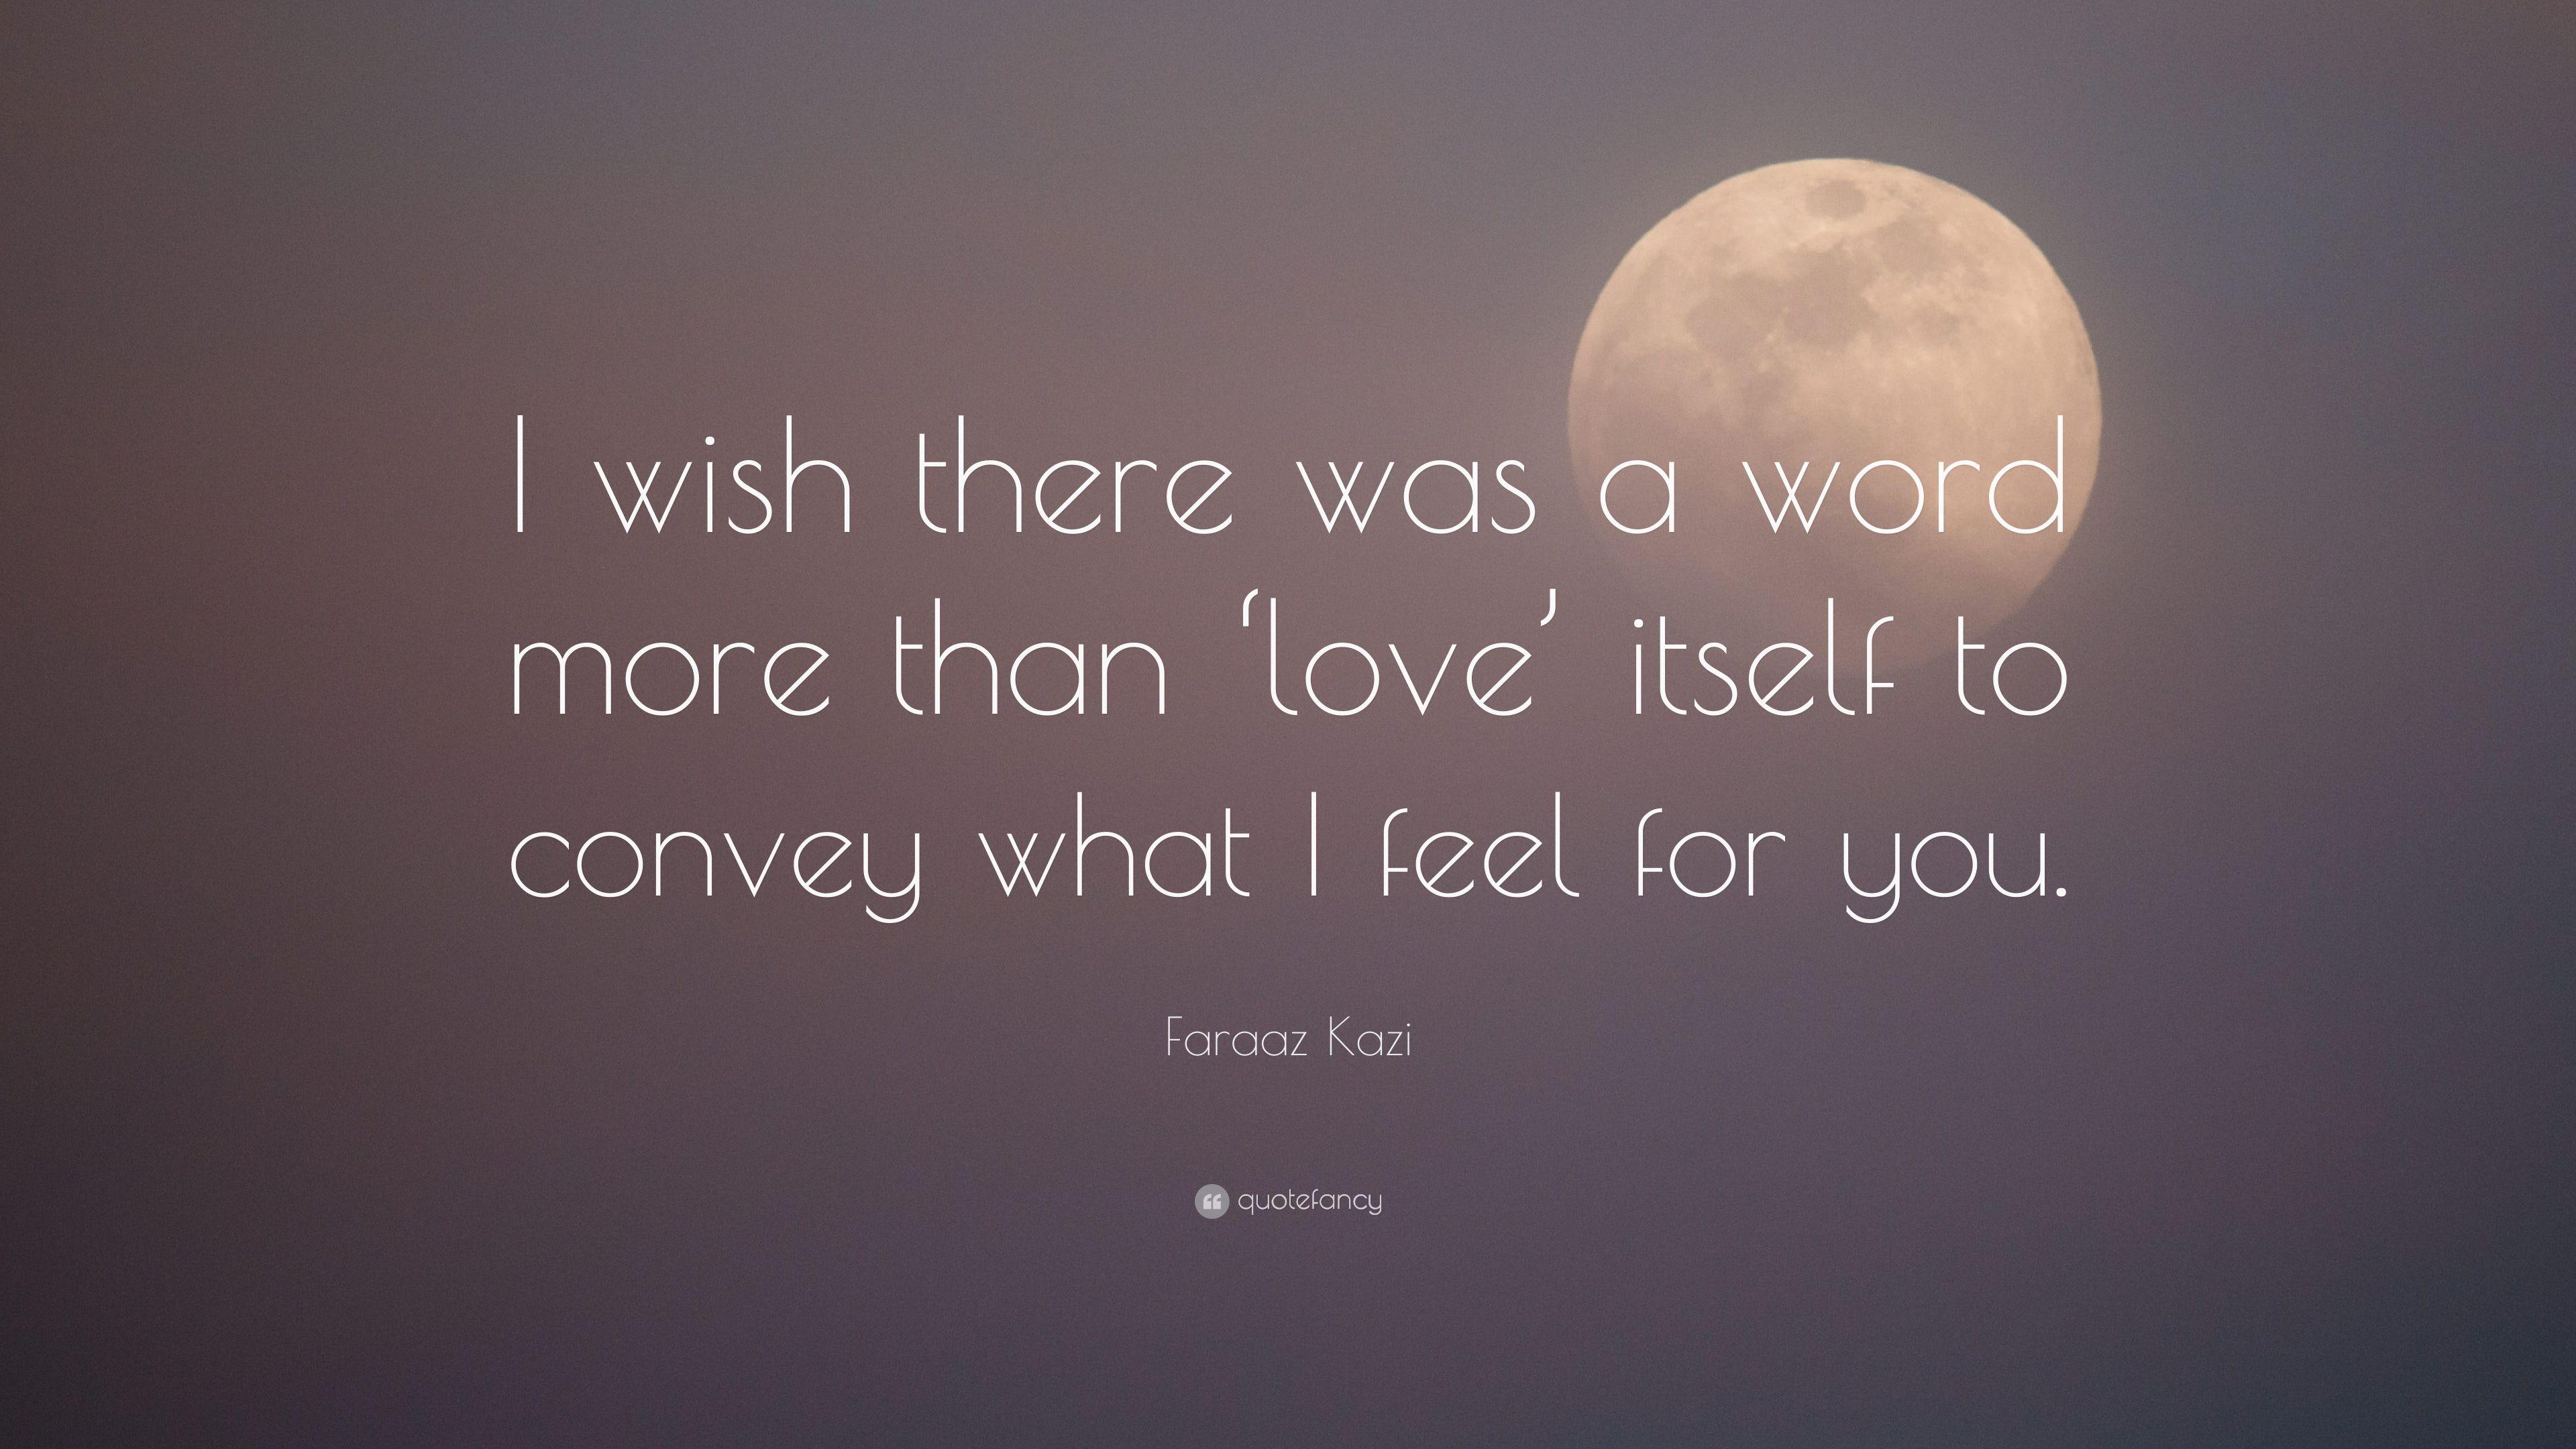 Faraaz Kazi Quote: “I wish there was a word more than 'love' itself